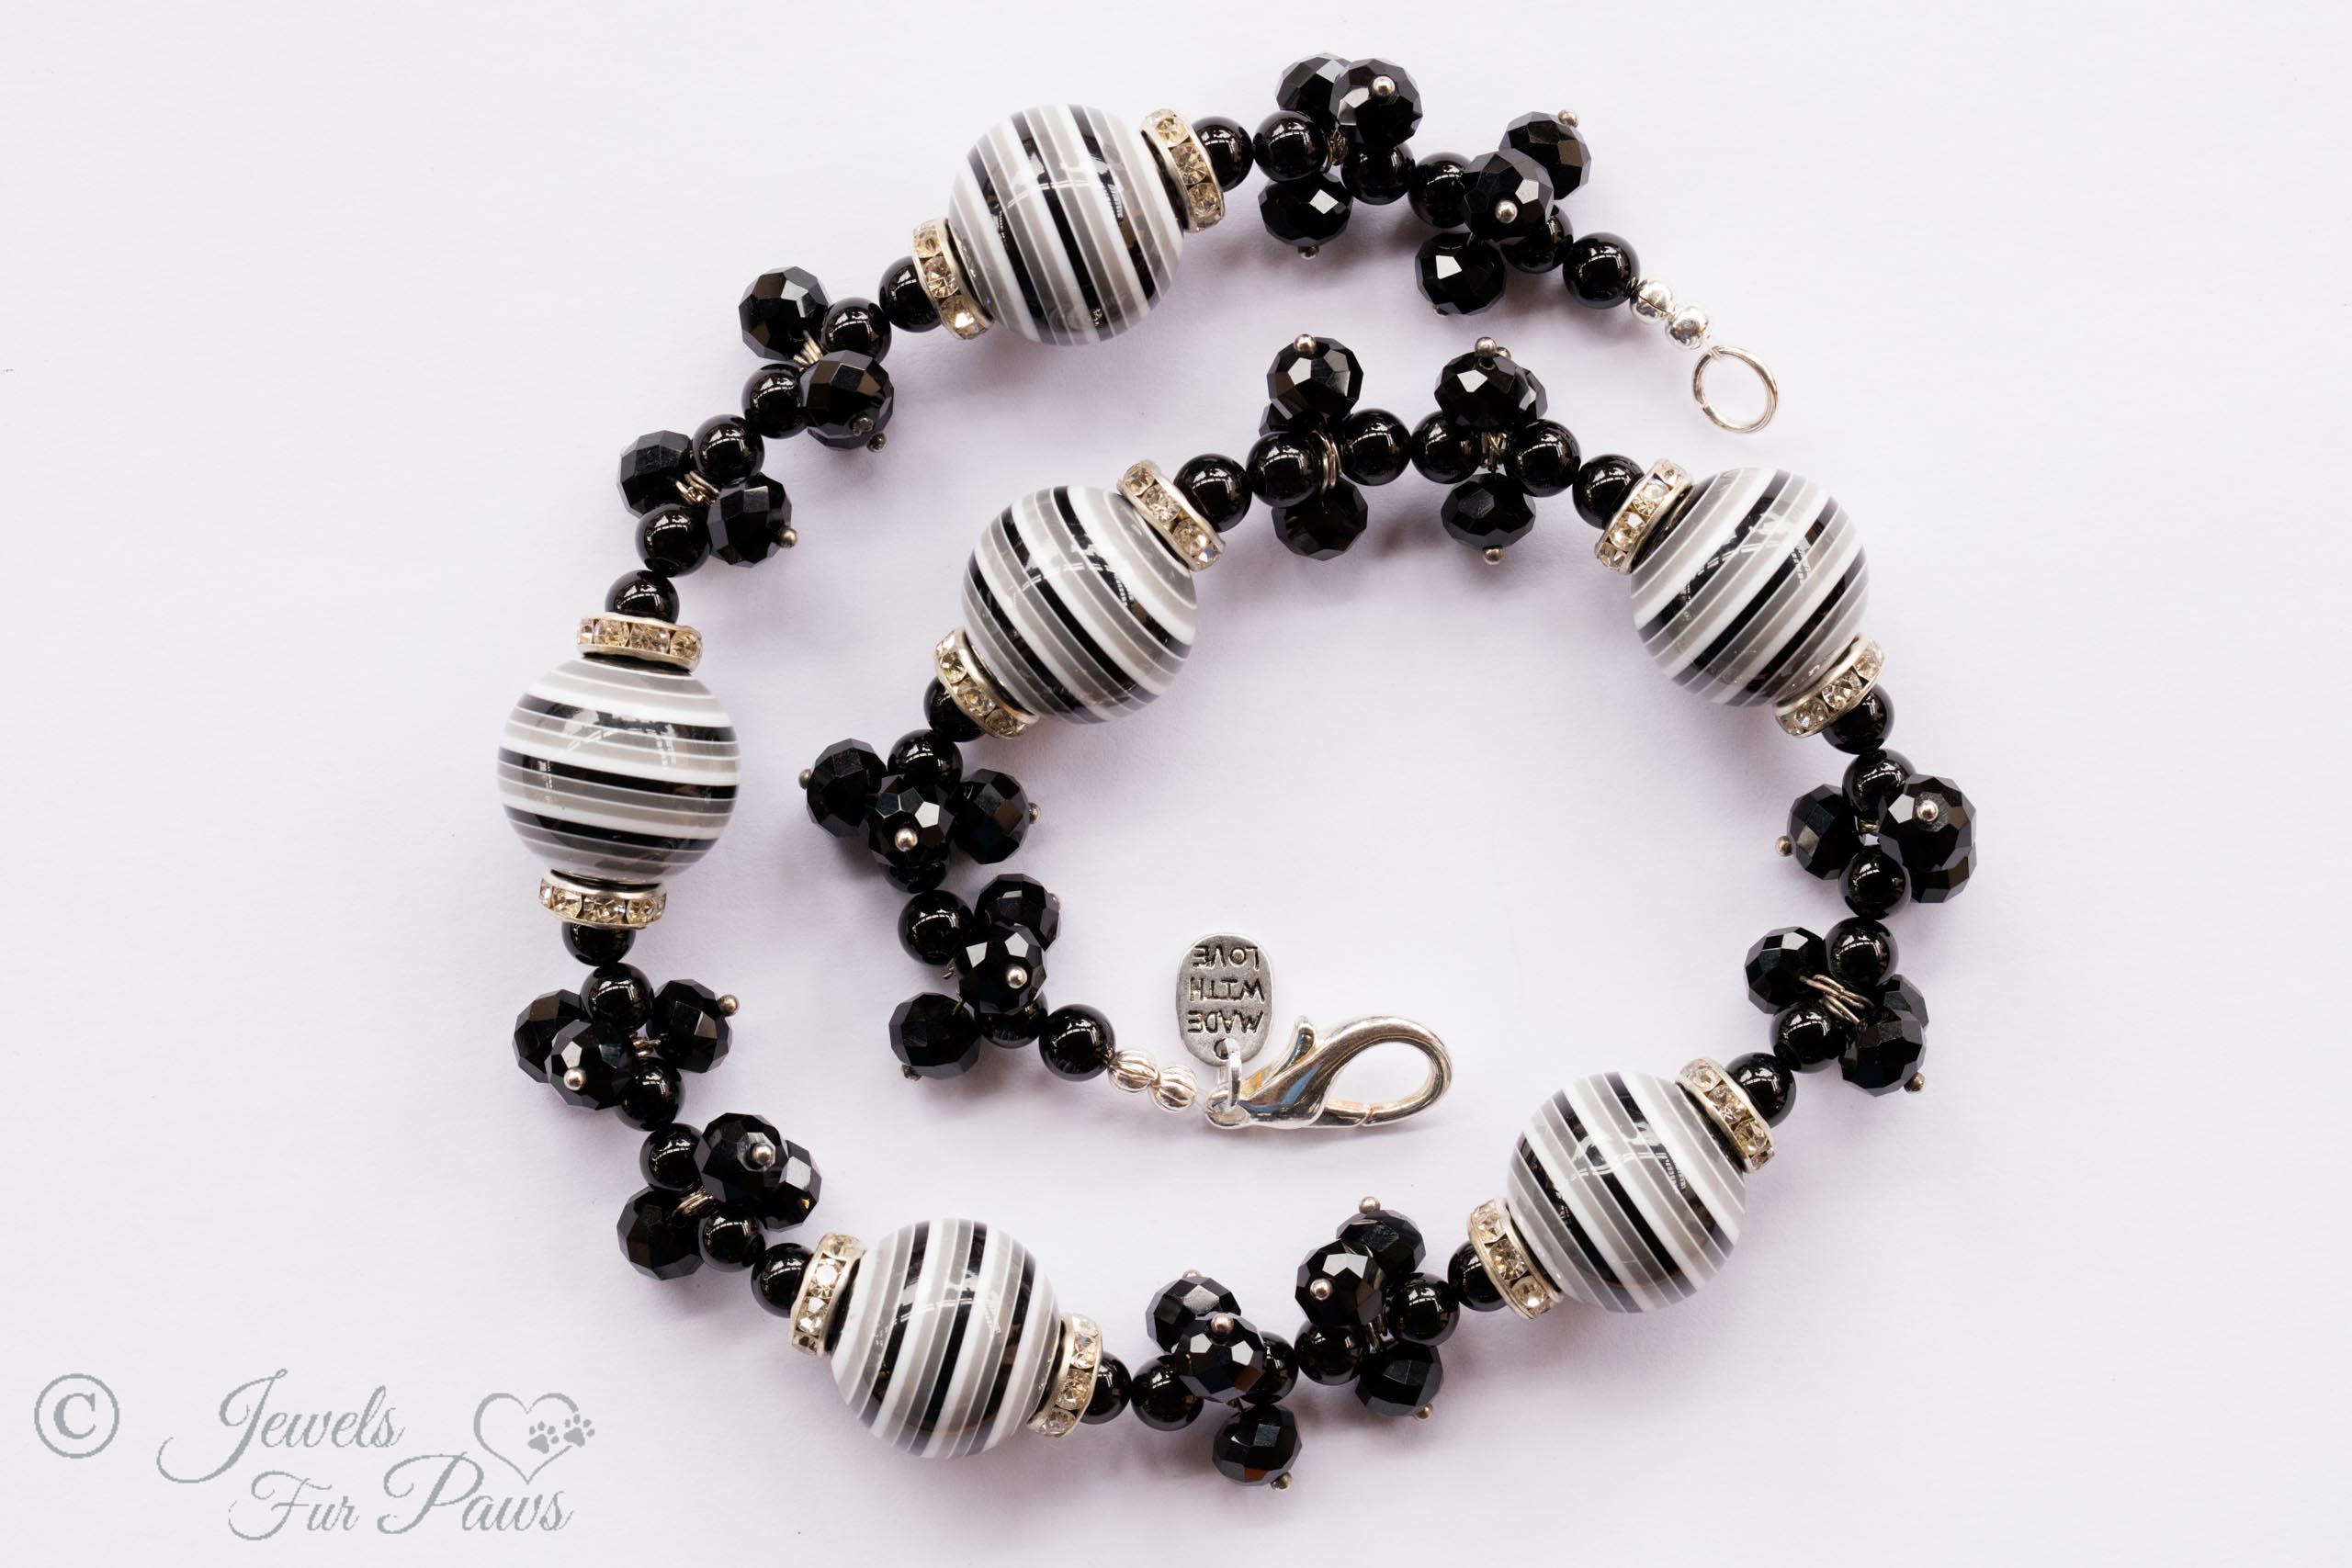 Six large black and white striped beads with black swarovski crystal clusters on white background